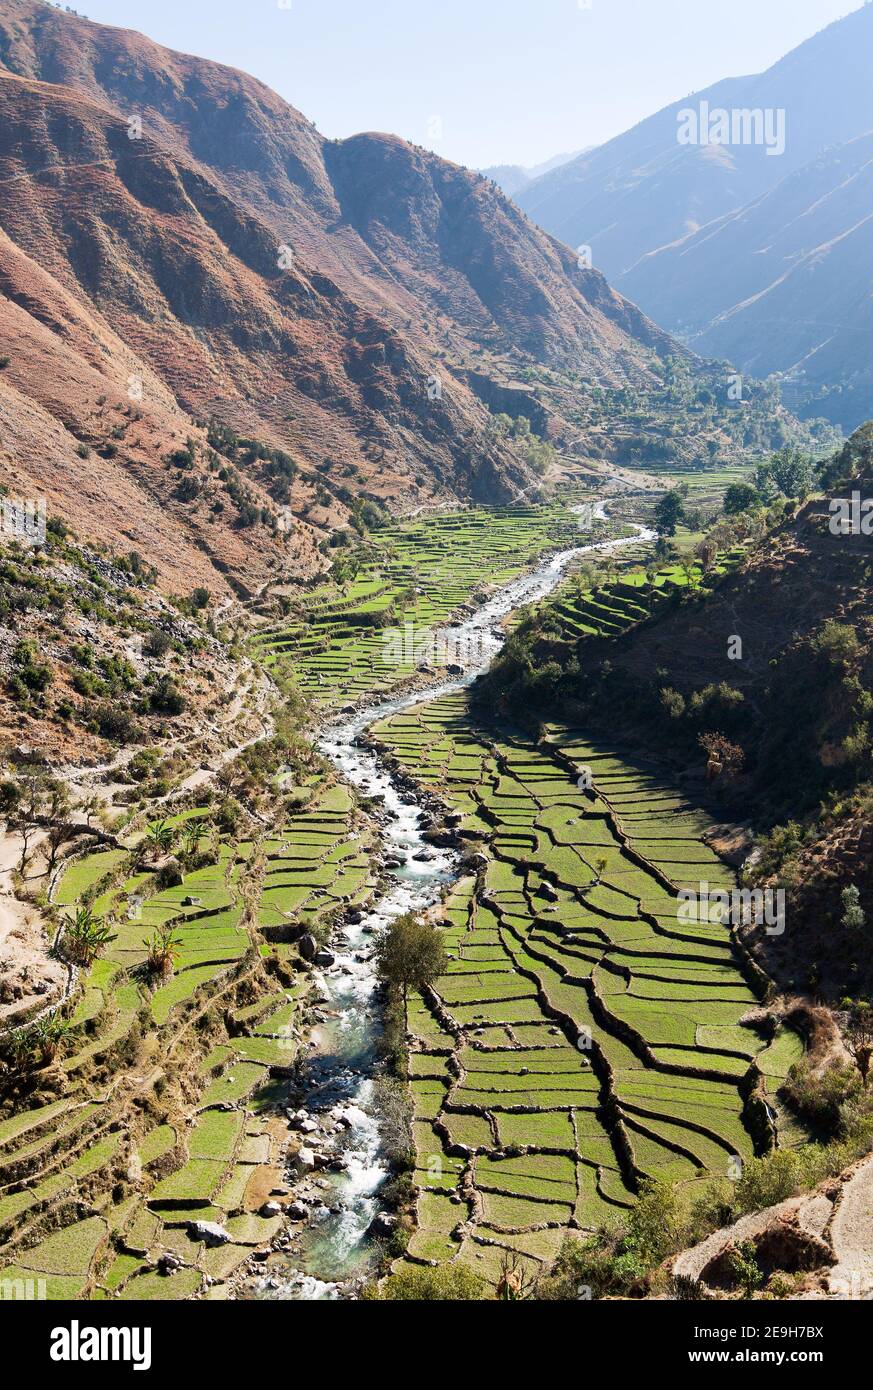 valley with rice field and river in western Nepal Stock Photo